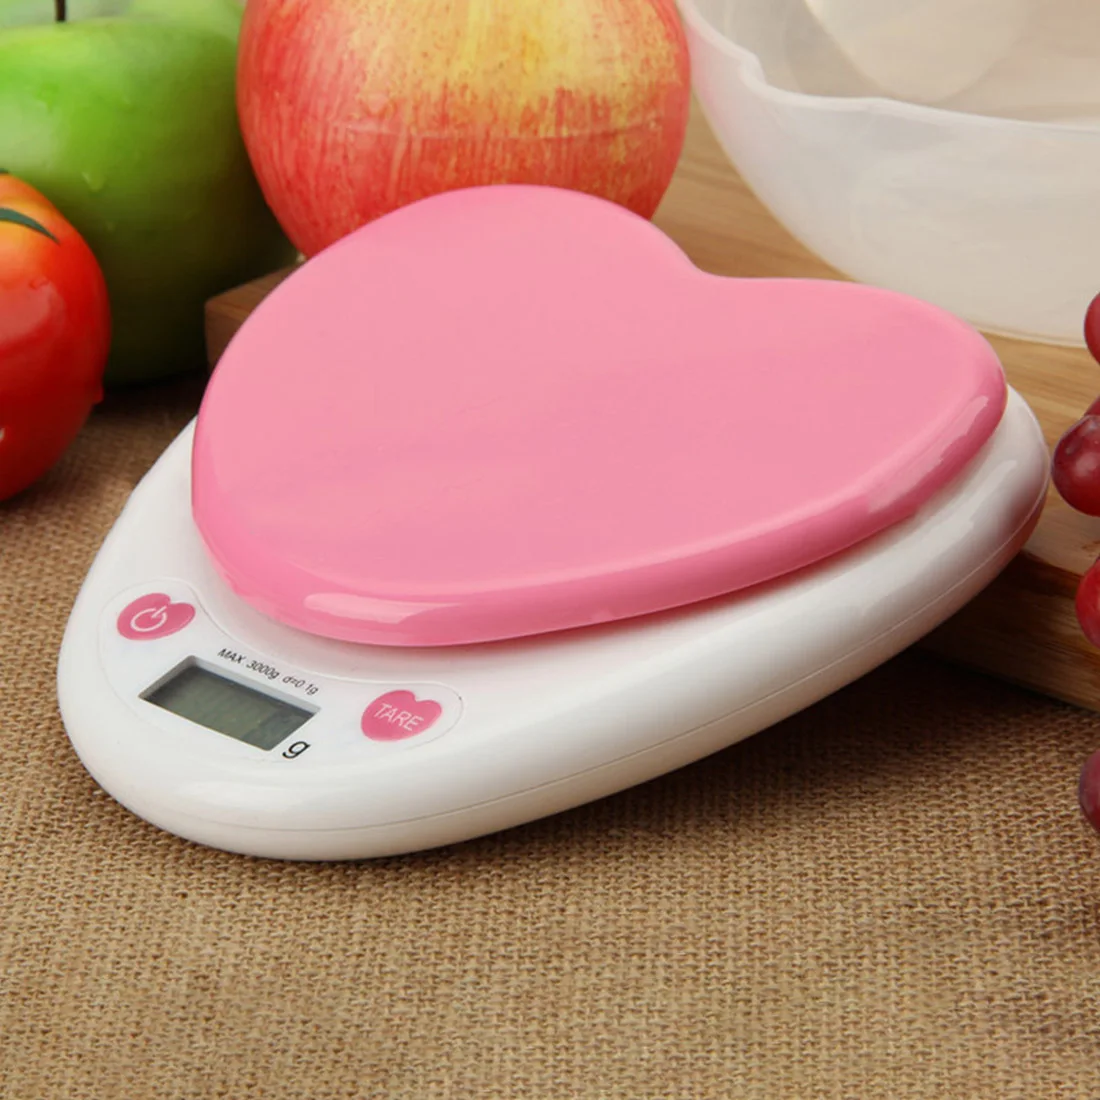 

5000g/1g 5kg Food Diet Postal Kitchen Scales Balance Measuring Weighing Scale LED Display Electronic Scales Weight Tool